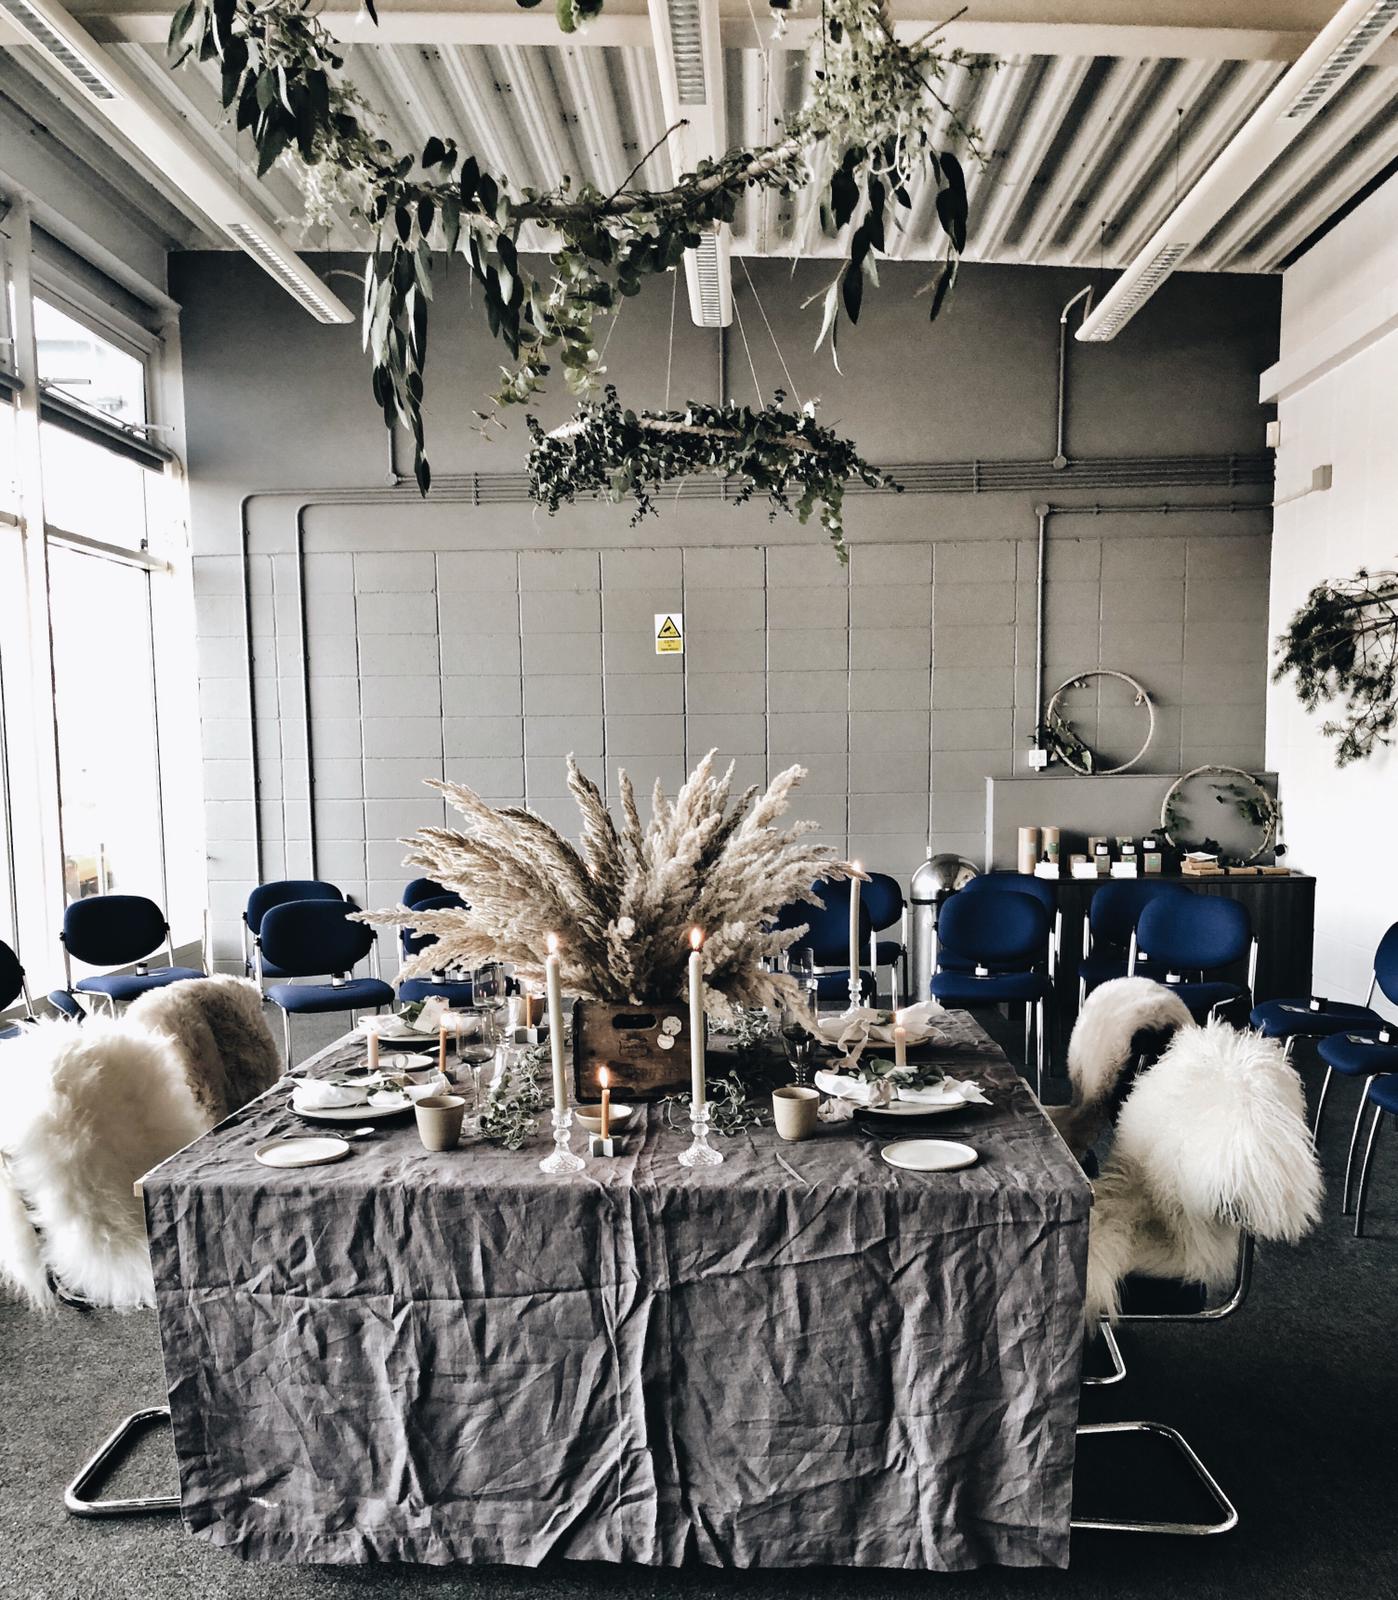  We were working with quite a big space so went for a dramatic table centre piece using pampas grass and made the table cosier by adding sheepskins to our chairs from Jord Home 